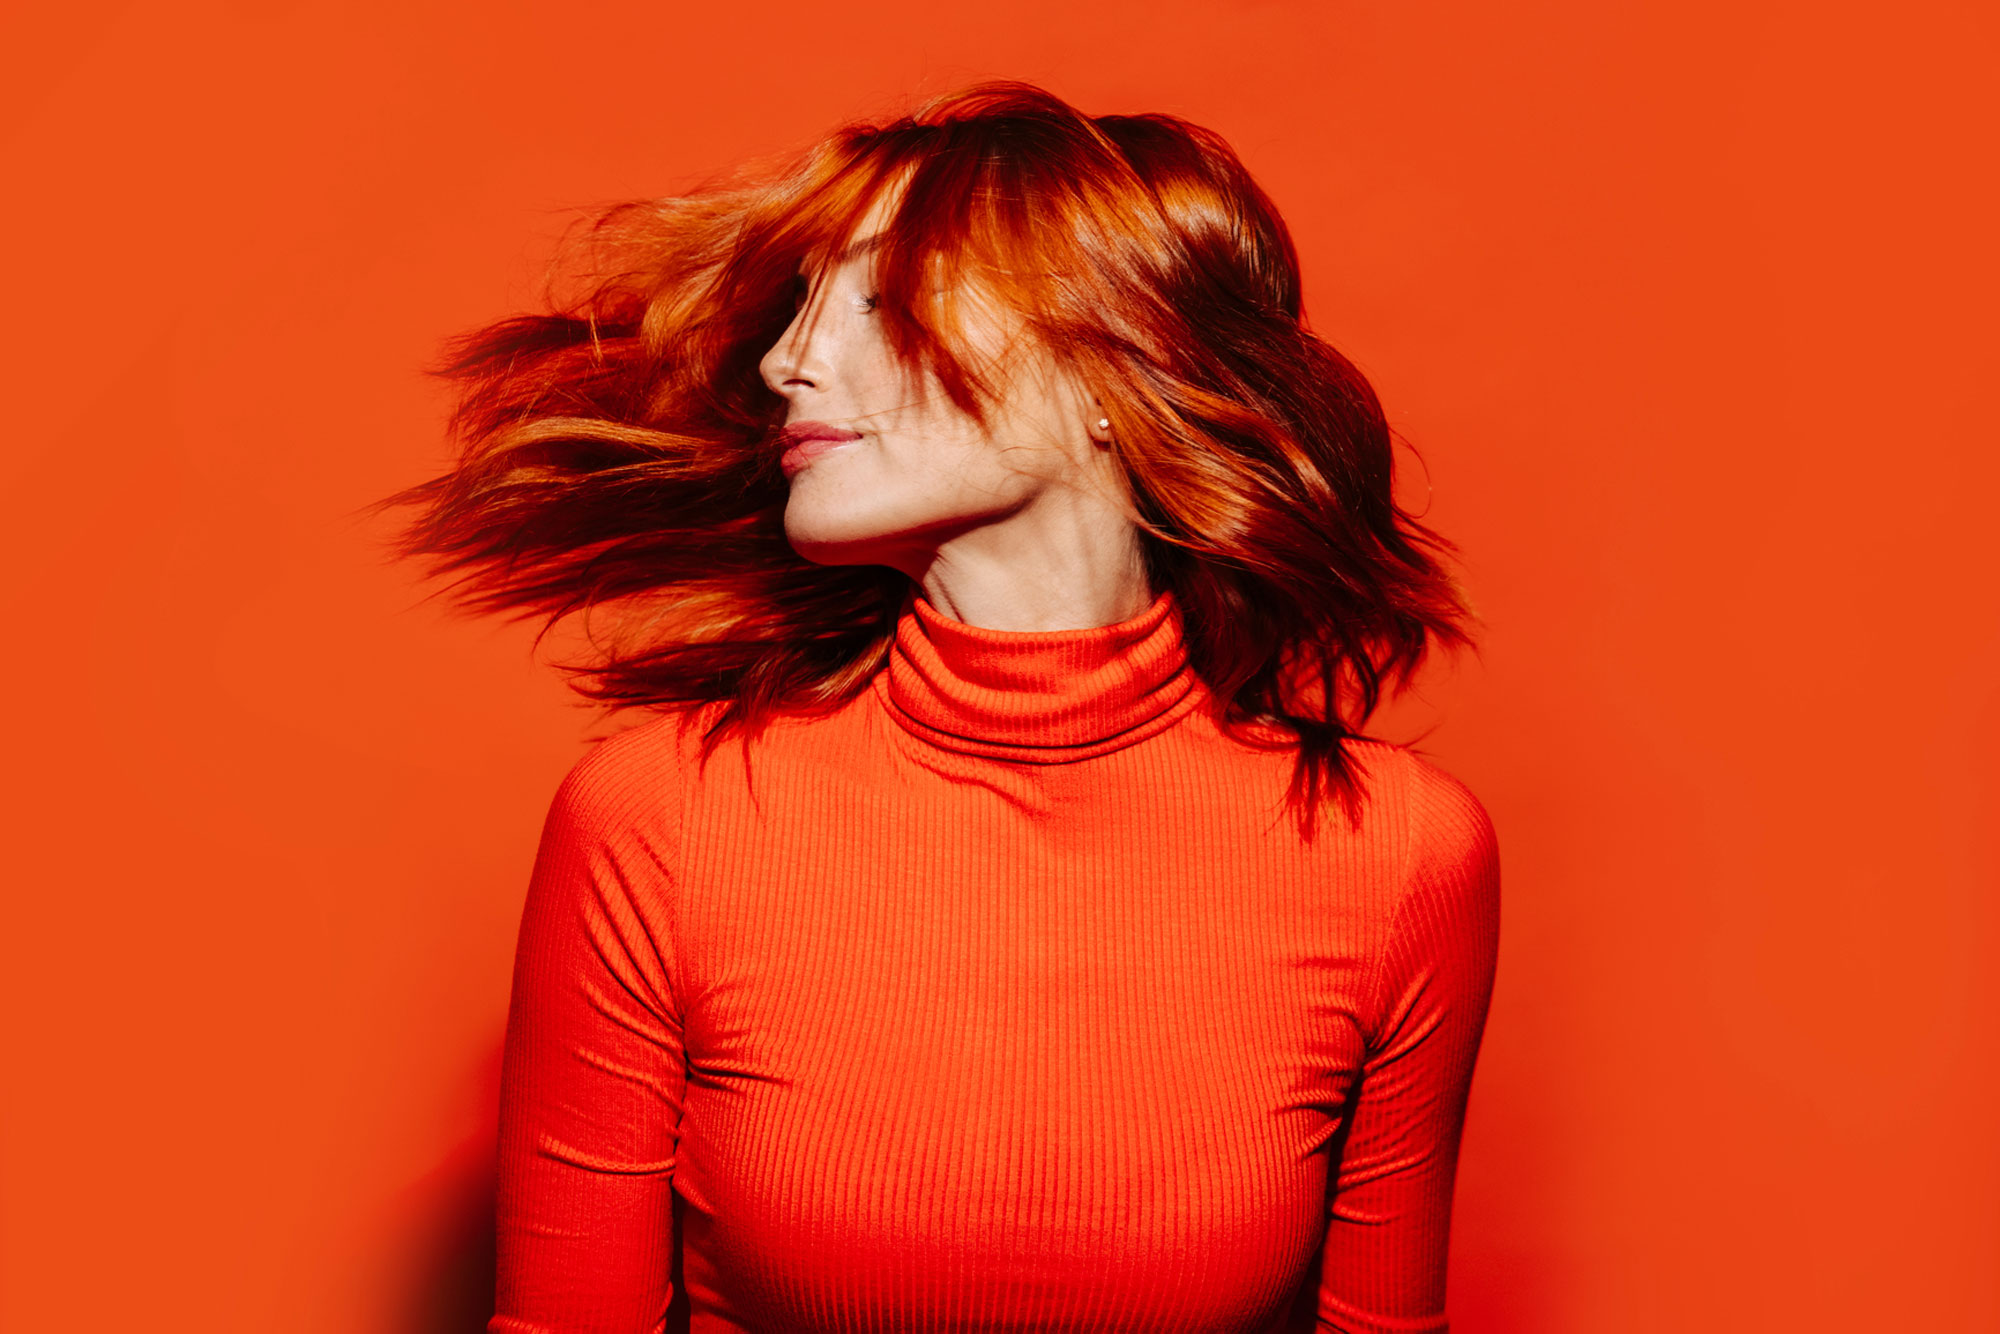 portrait of woman with red hair on orange background